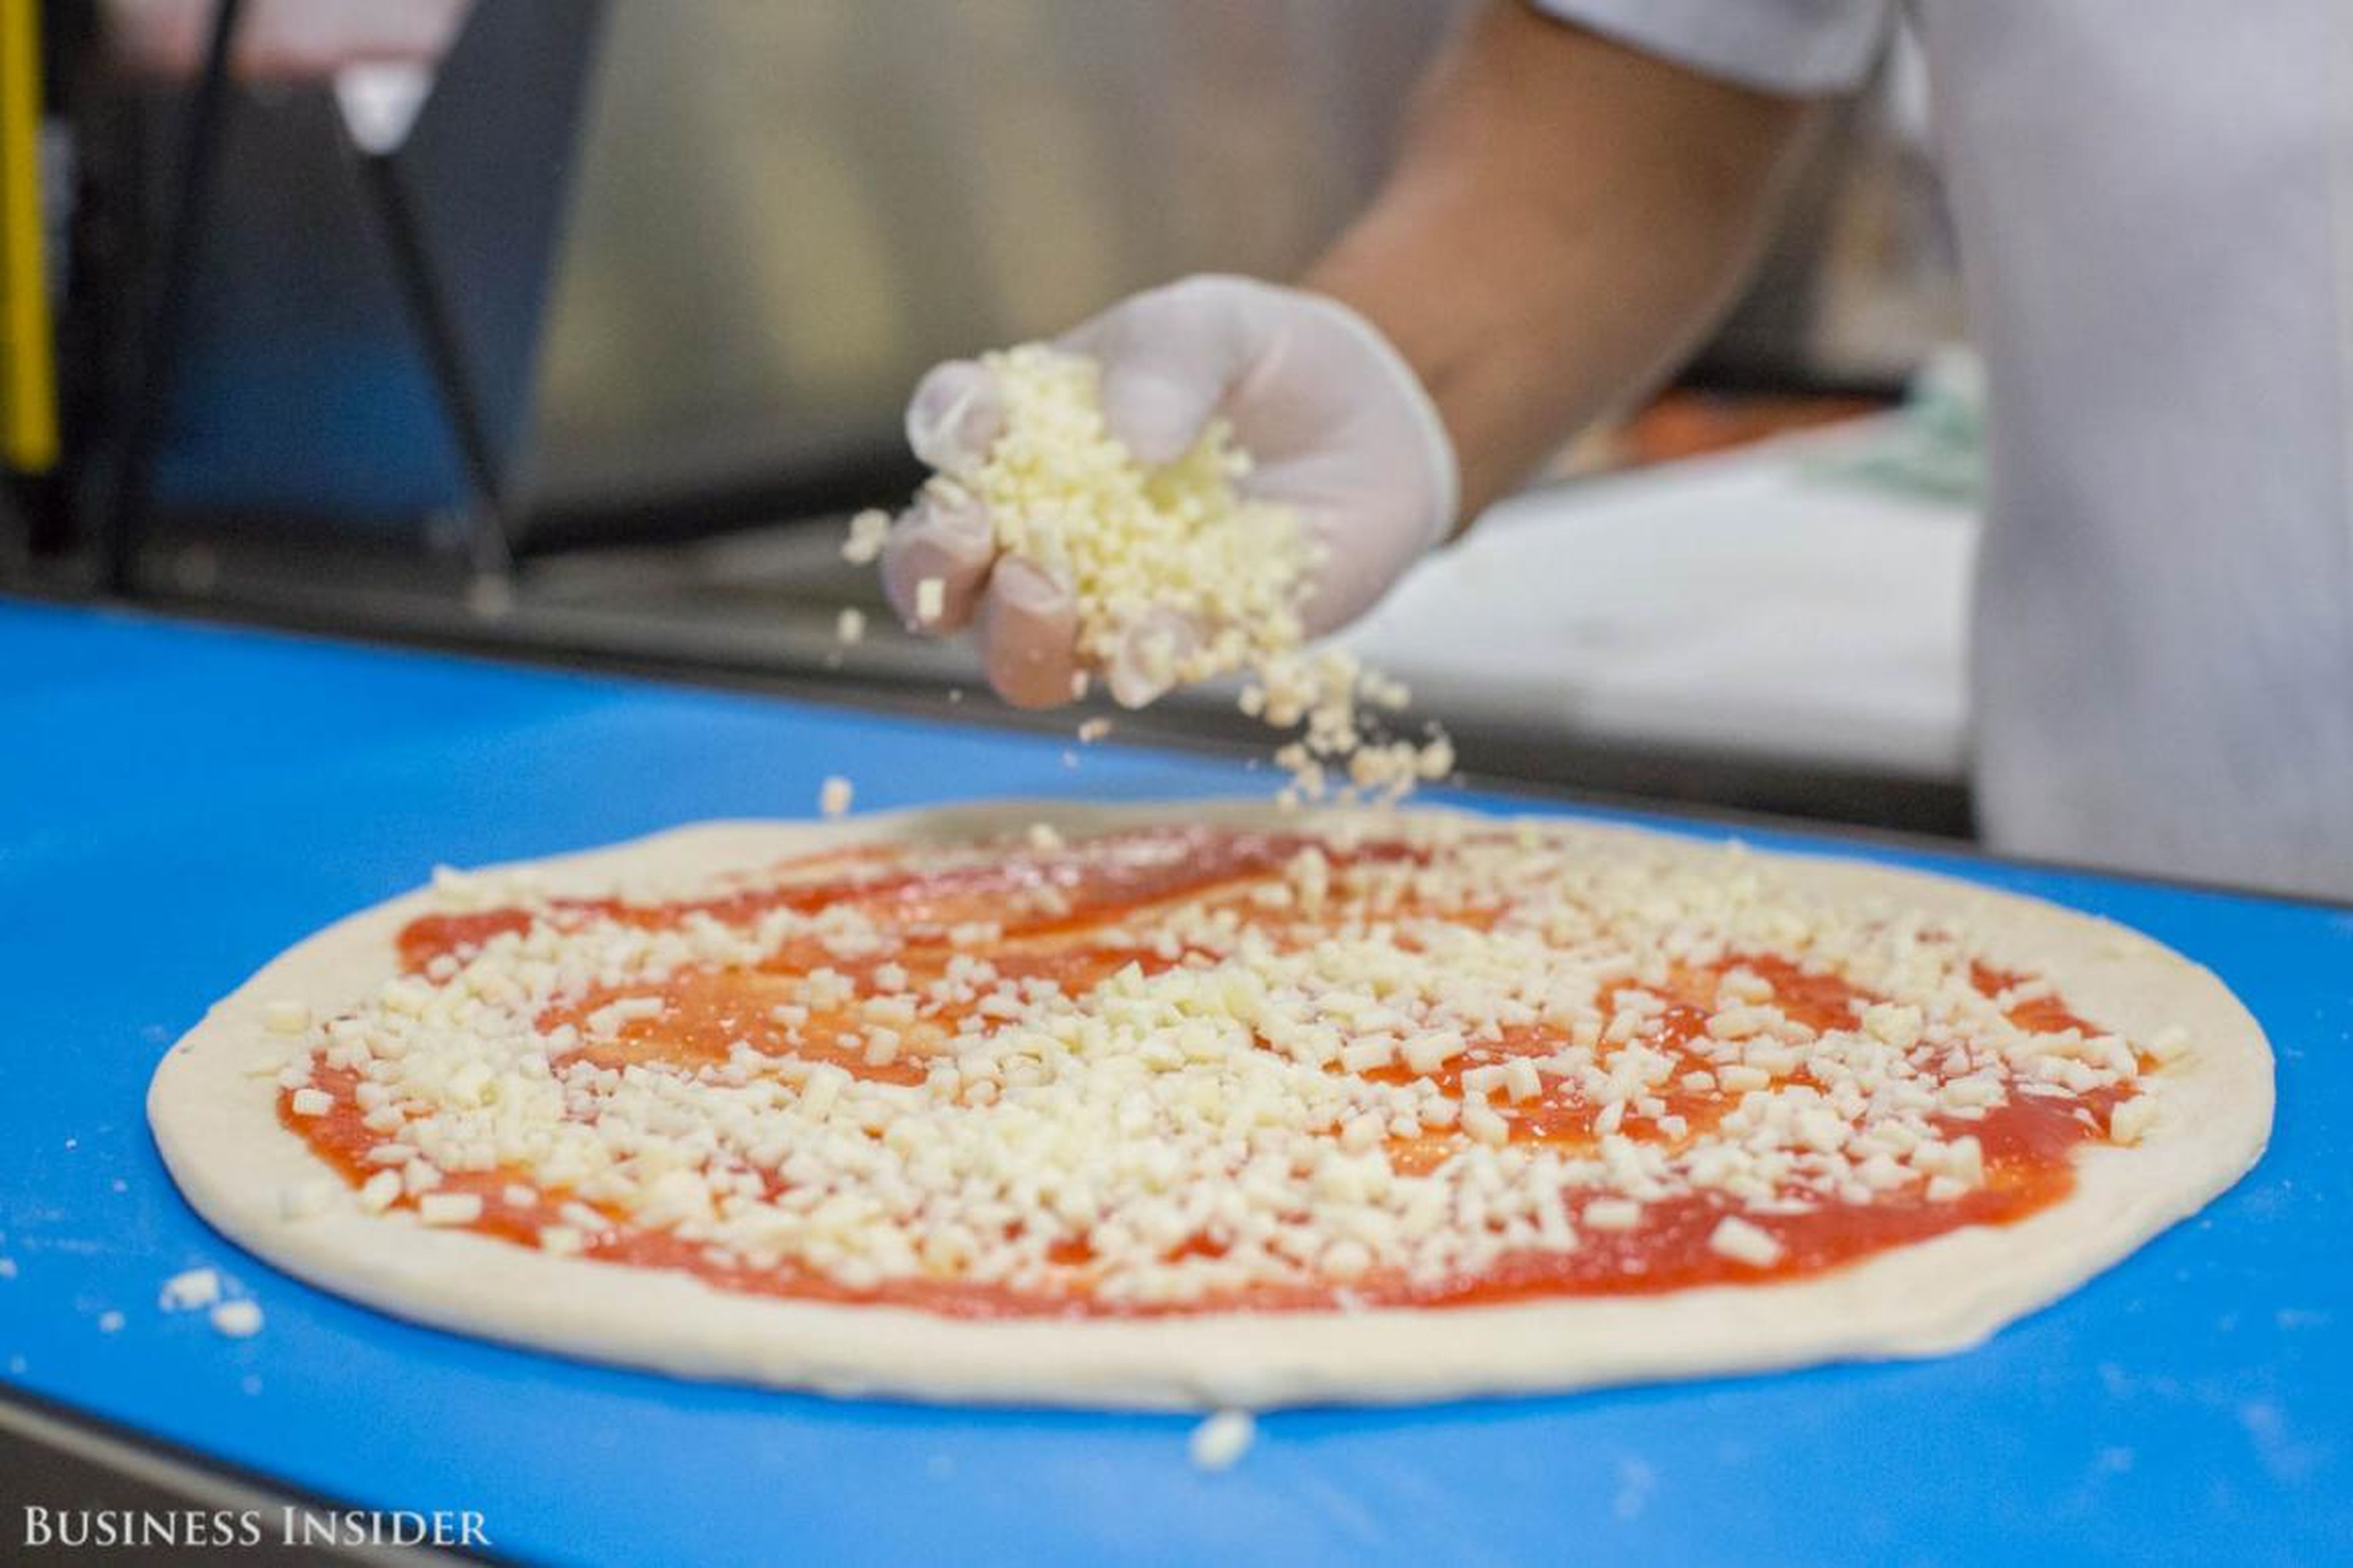 A human dresses the pie with cheeses and toppings. It's a difficult part of the process to automate because toppings come in different weights, sizes, and textures.